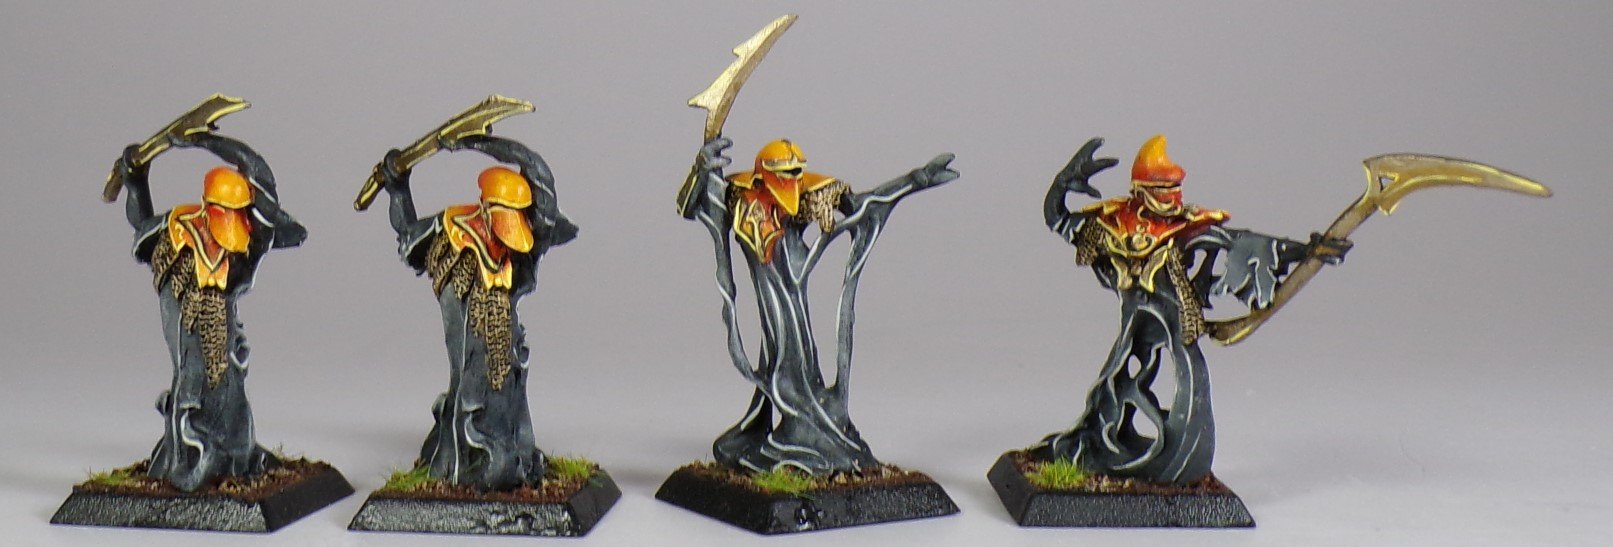 L5R Legend of the Five Rings Miniature Painting Service Paintedfigs (45).jpg